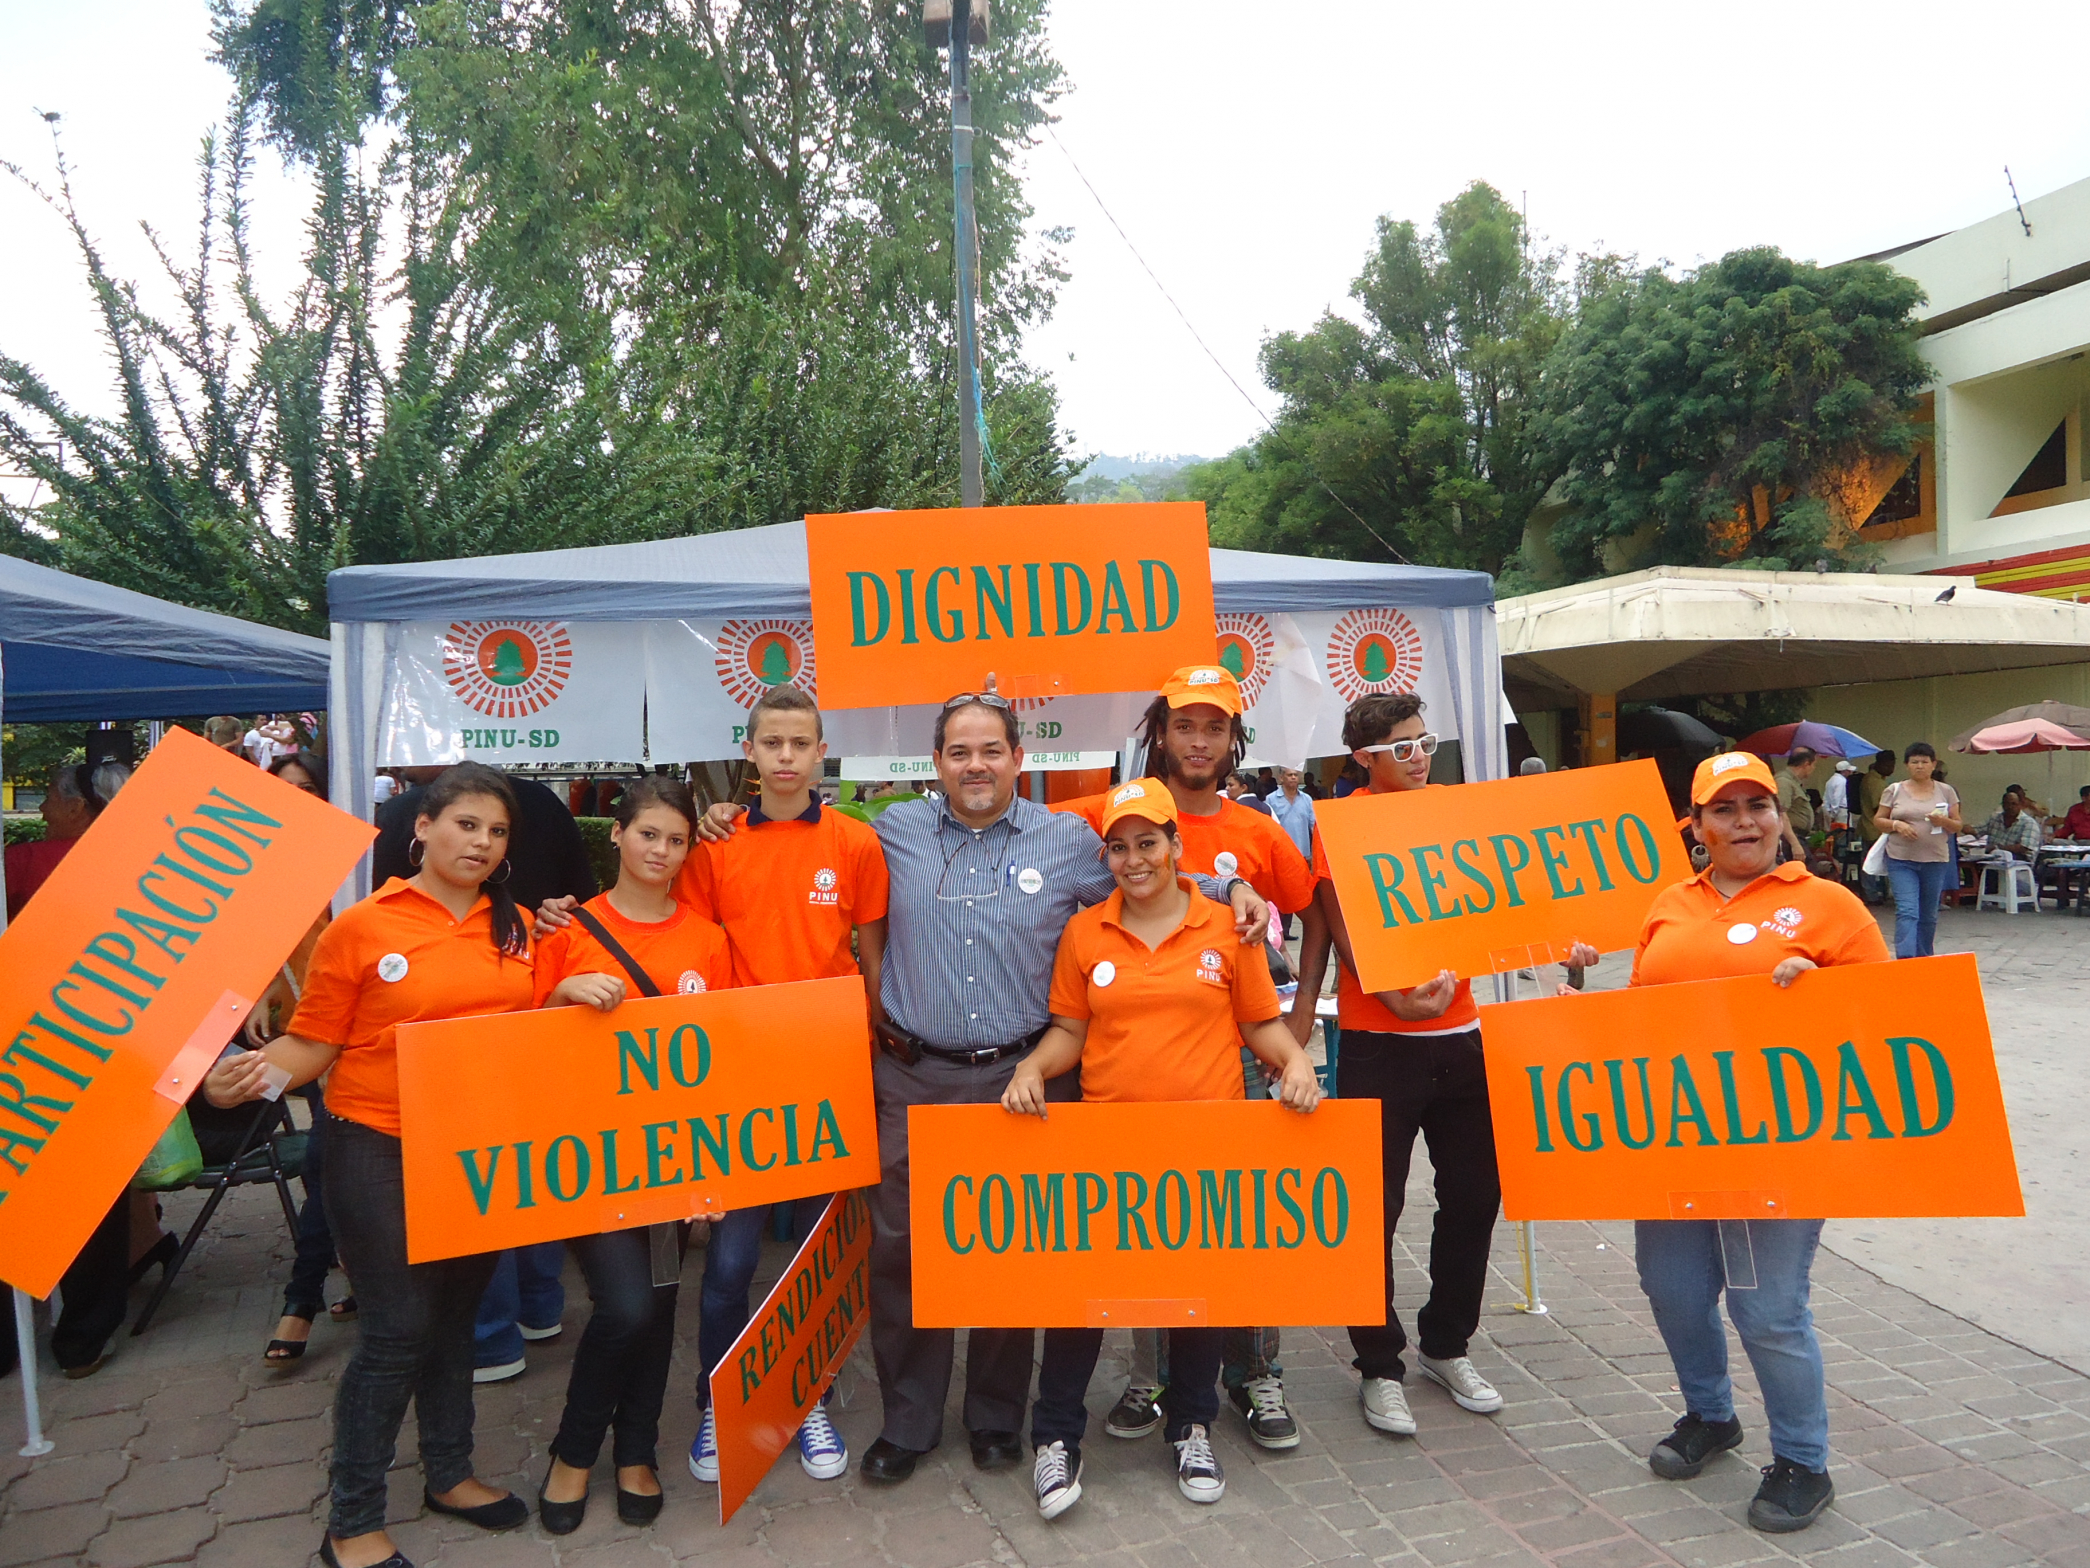 A group of Honduran activists hold orange signs in Spanish calling for an end to violence against women in politics.